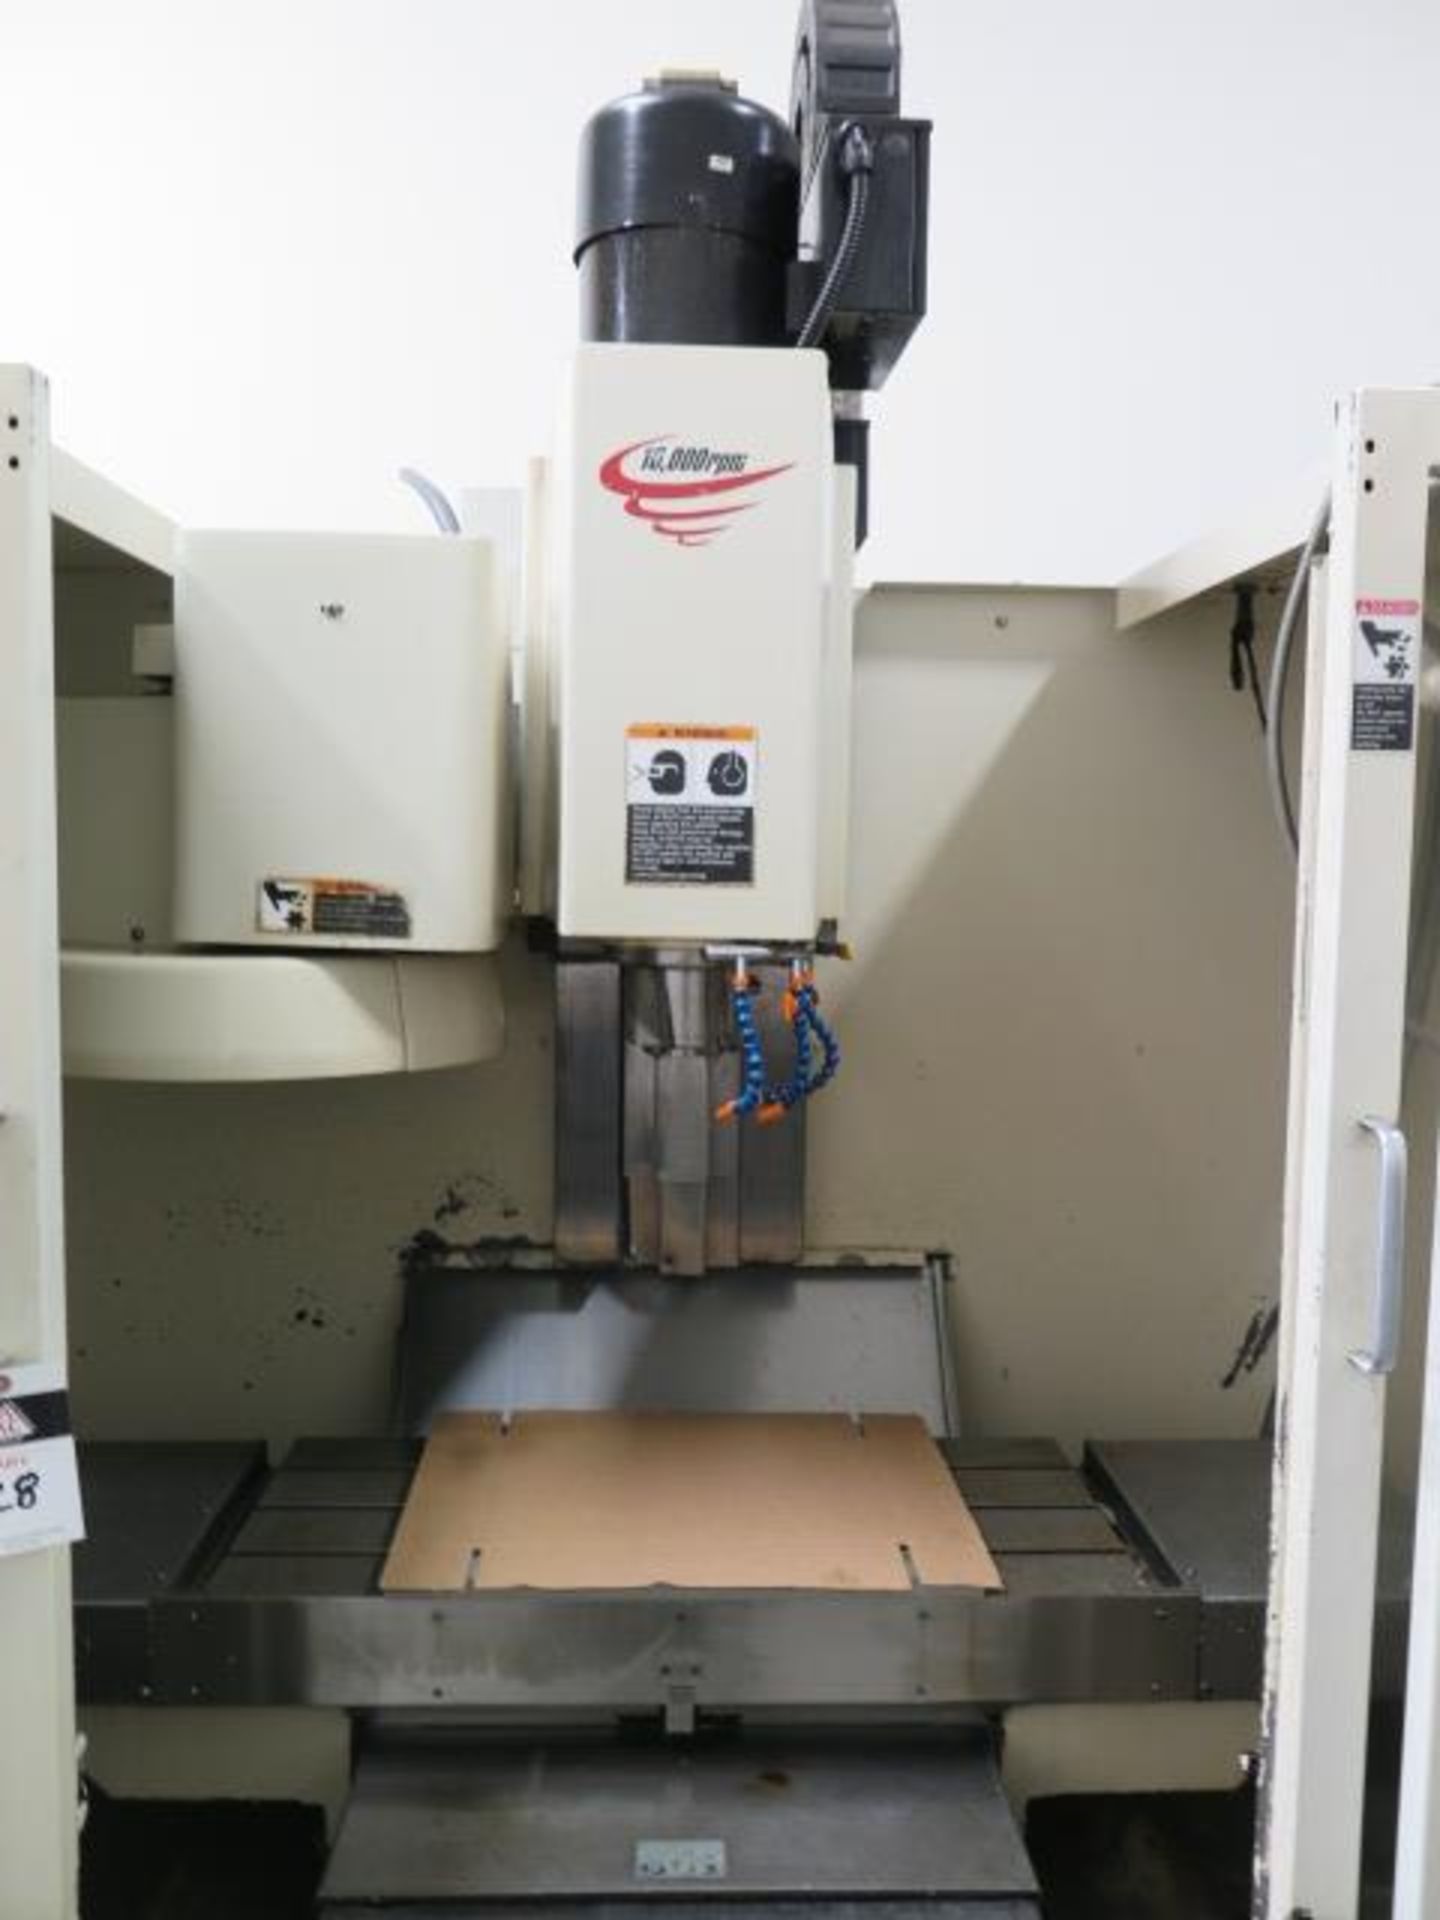 2003 Fadal VMC3016HT 4-Axis CNC VMC s/n 02124873 w/ Fadal Multi Processor control, SOLD AS IS - Image 4 of 12